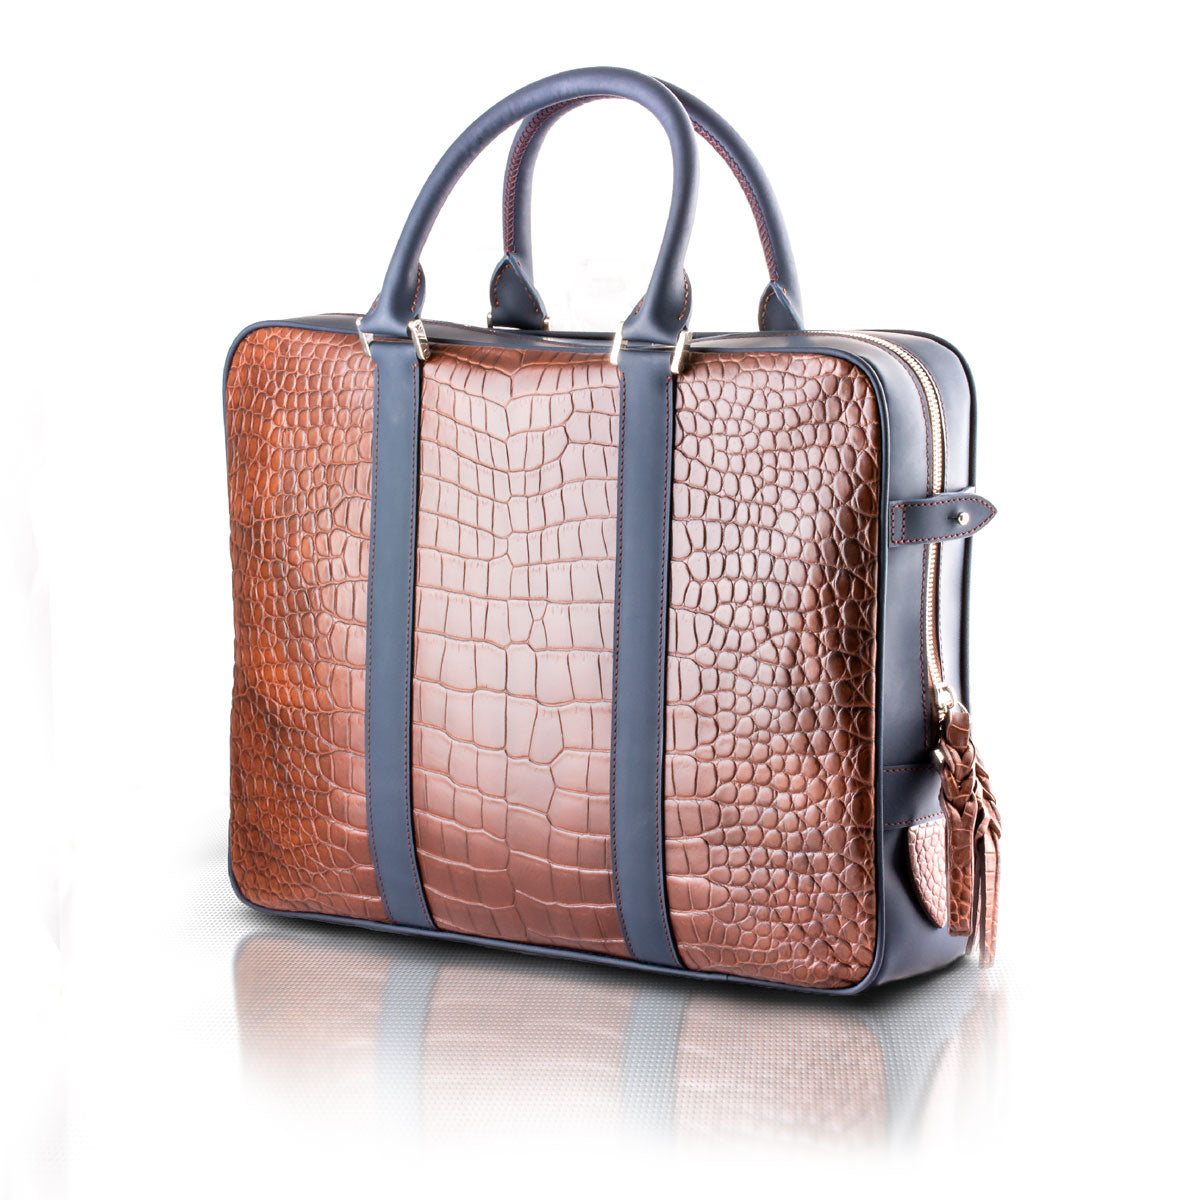 Why You Should Buy Alligator and Crocodile Skin Laptop Bags